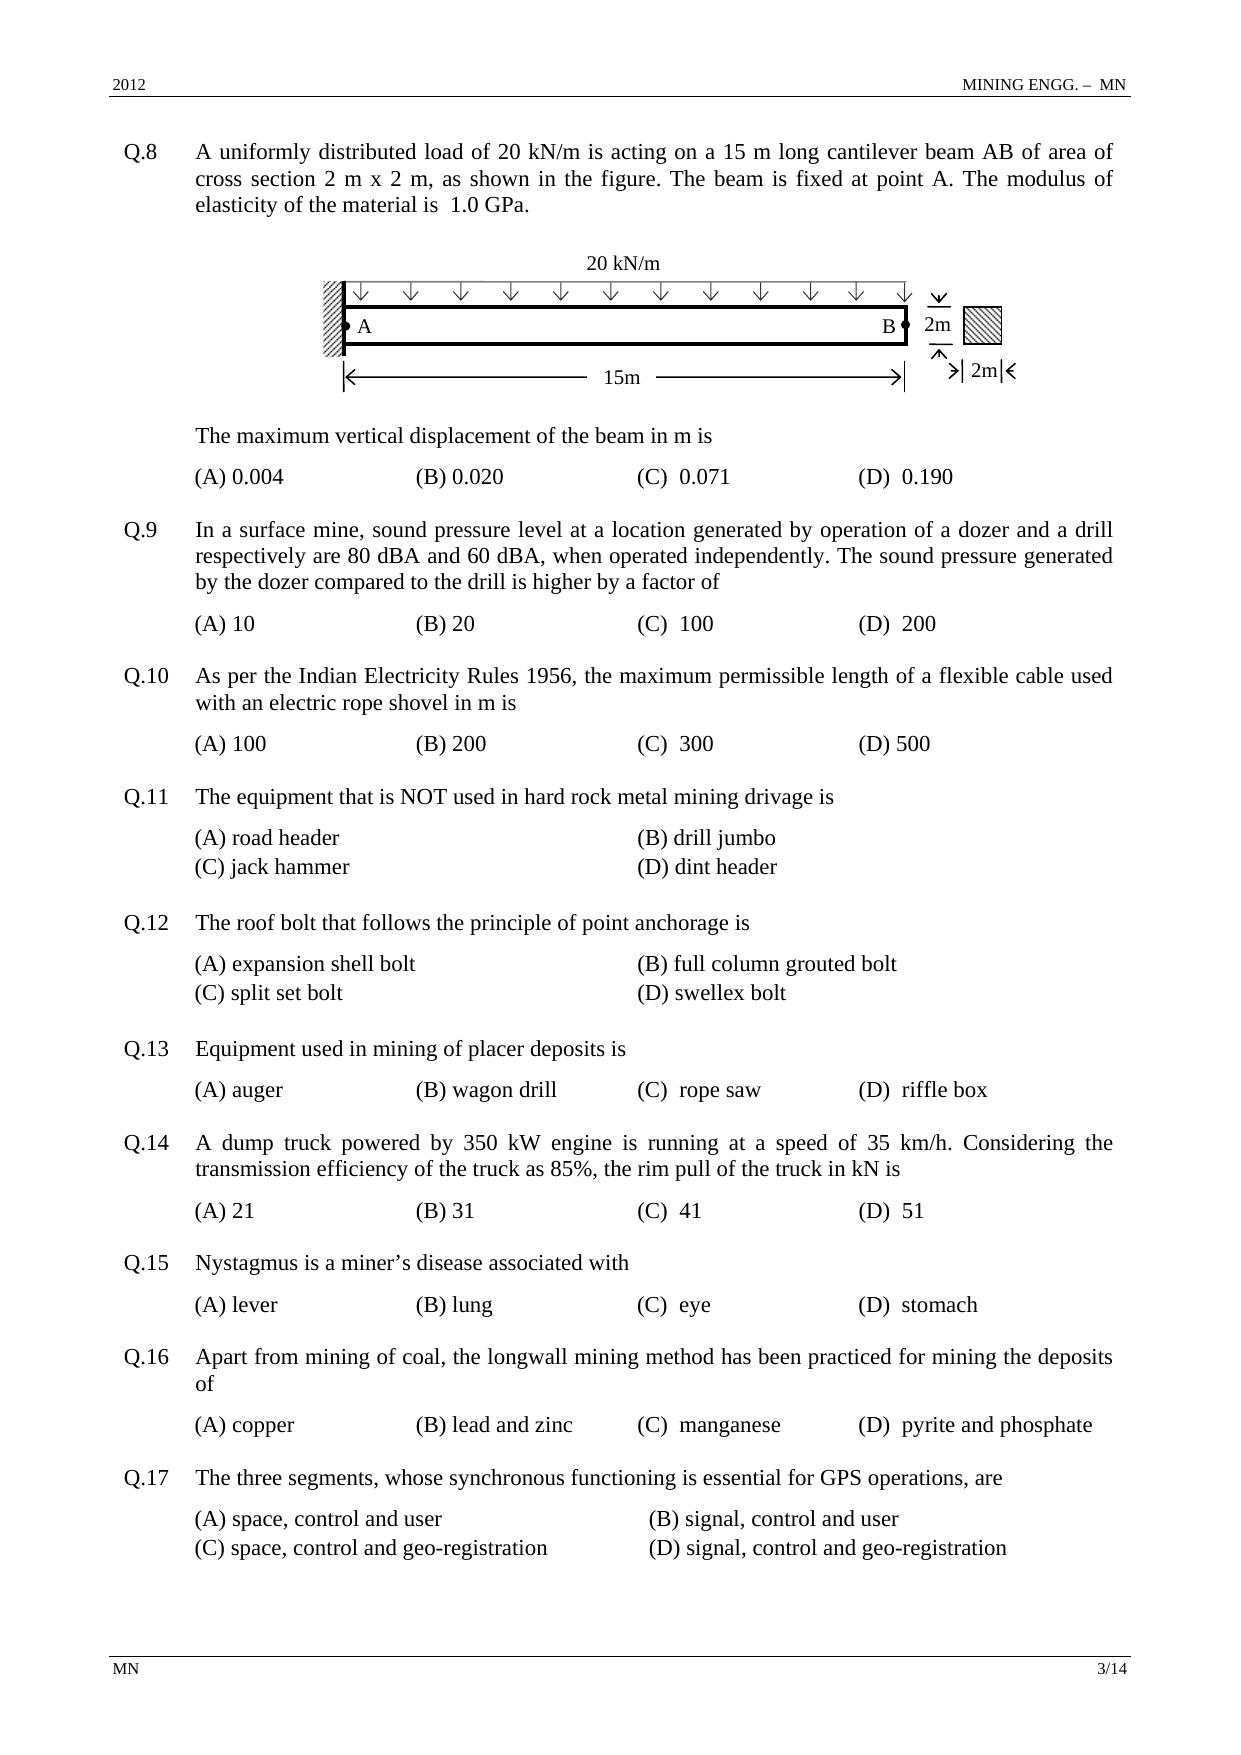 GATE 2012 Mining Engineering (MN) Question Paper with Answer Key - Page 3